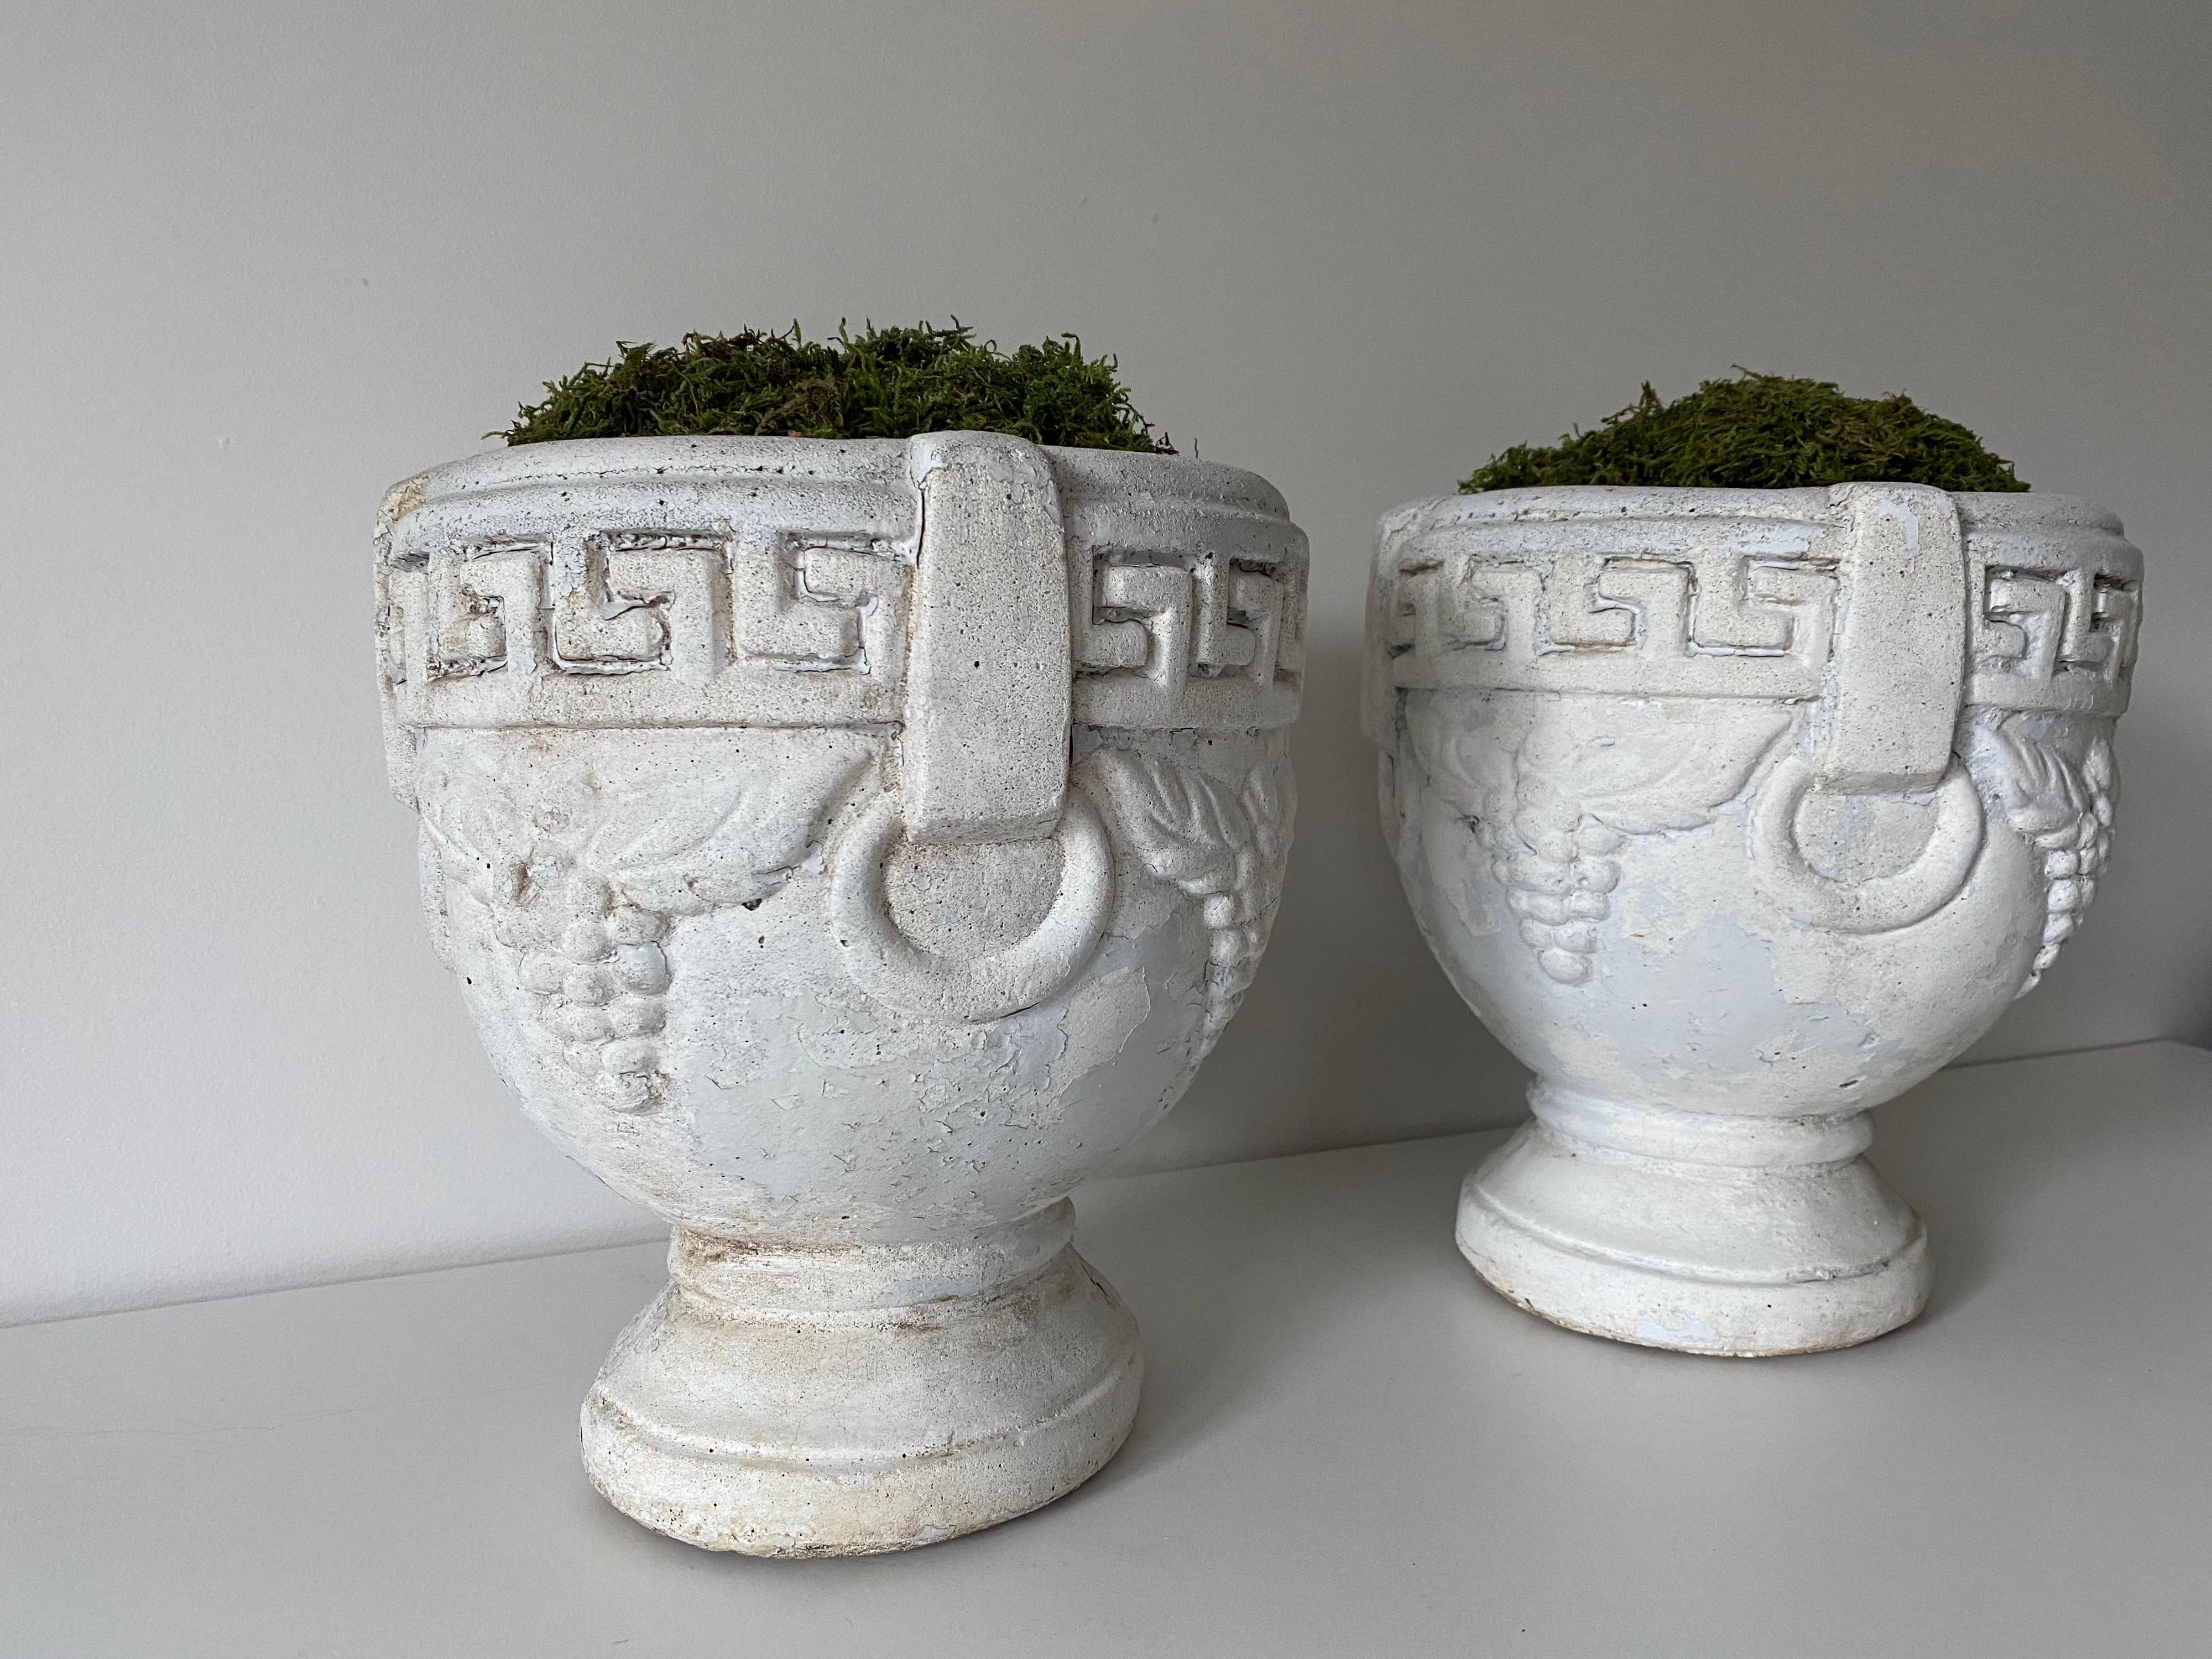 A pair of vintage concrete planters or urn with Greek key and grape motif decoration. Wonderful patina throughout.